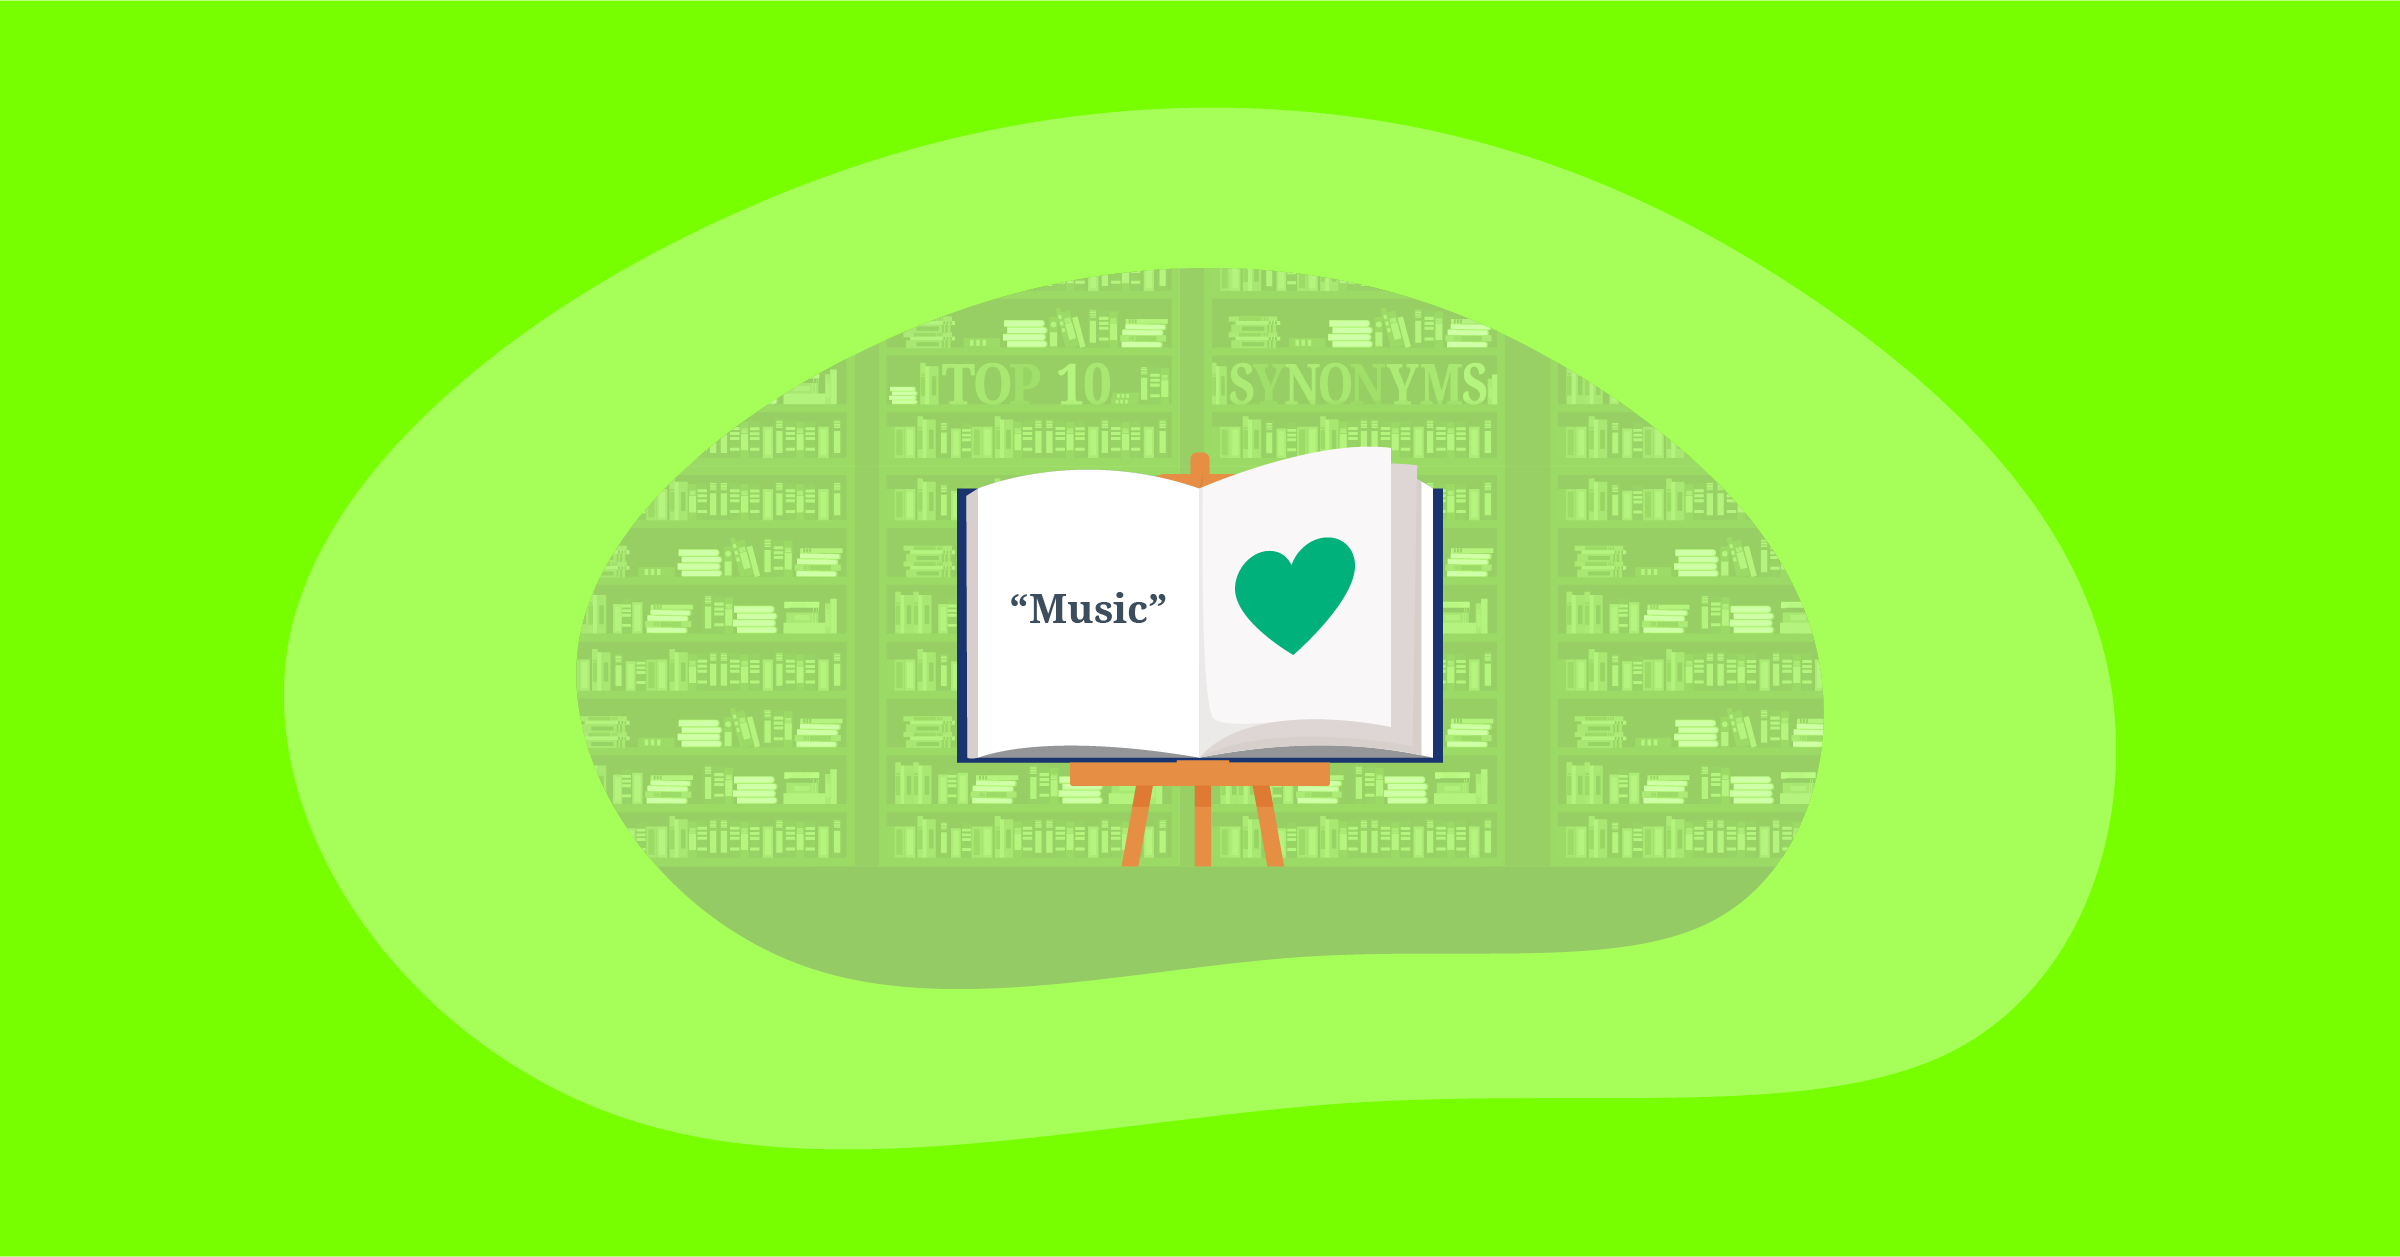 Illustration of the top 10 positive impactful synonyms for "Music"